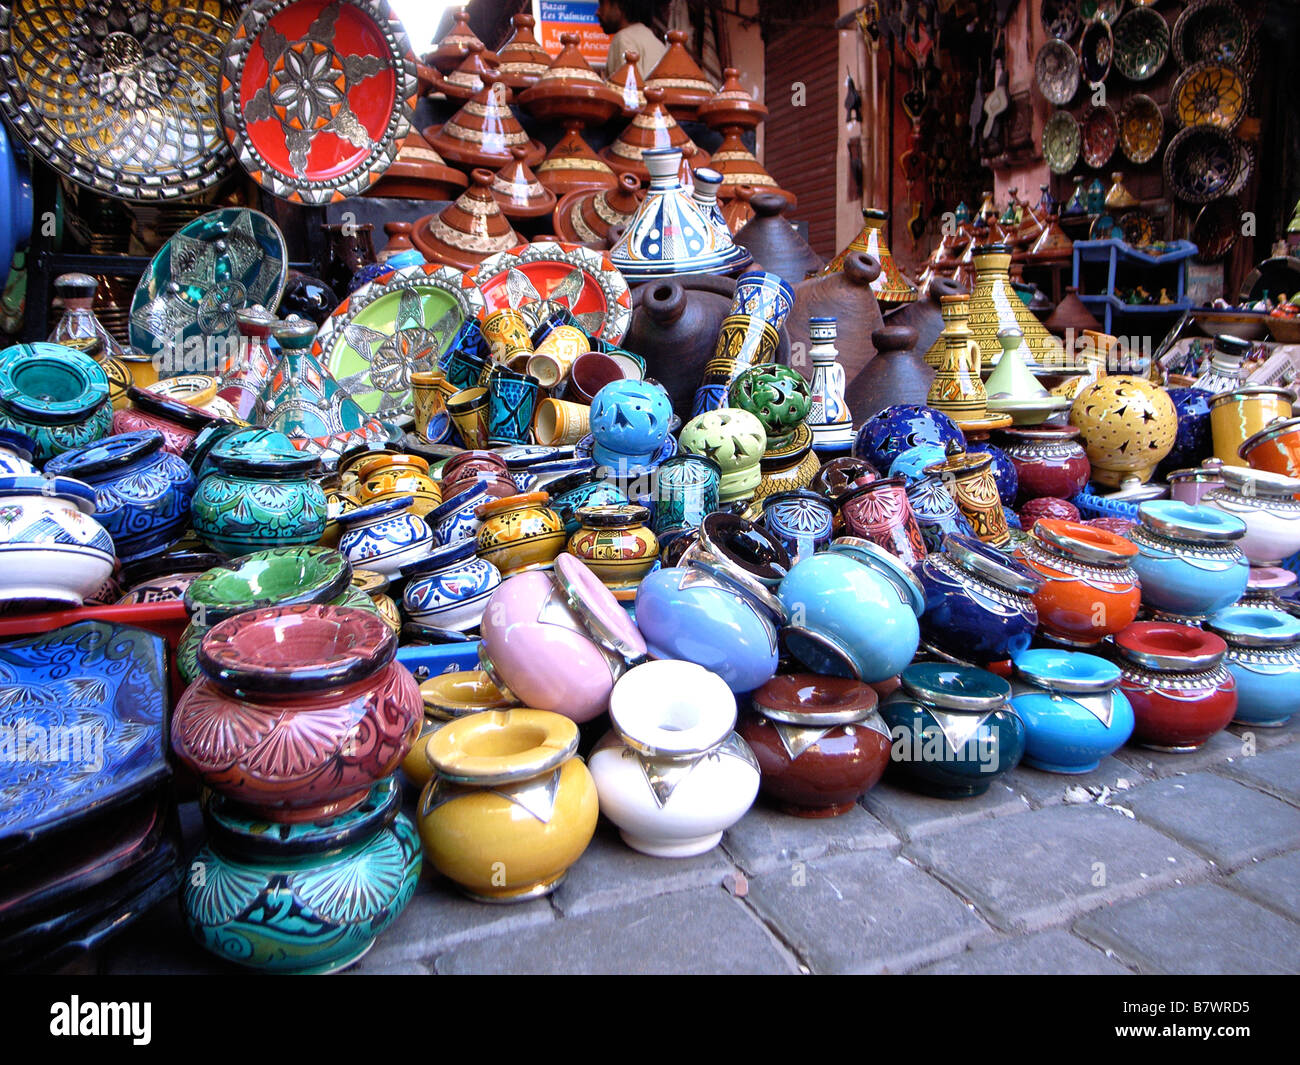 Pots for sale in a souk, Marrakech, Morocco Stock Photo